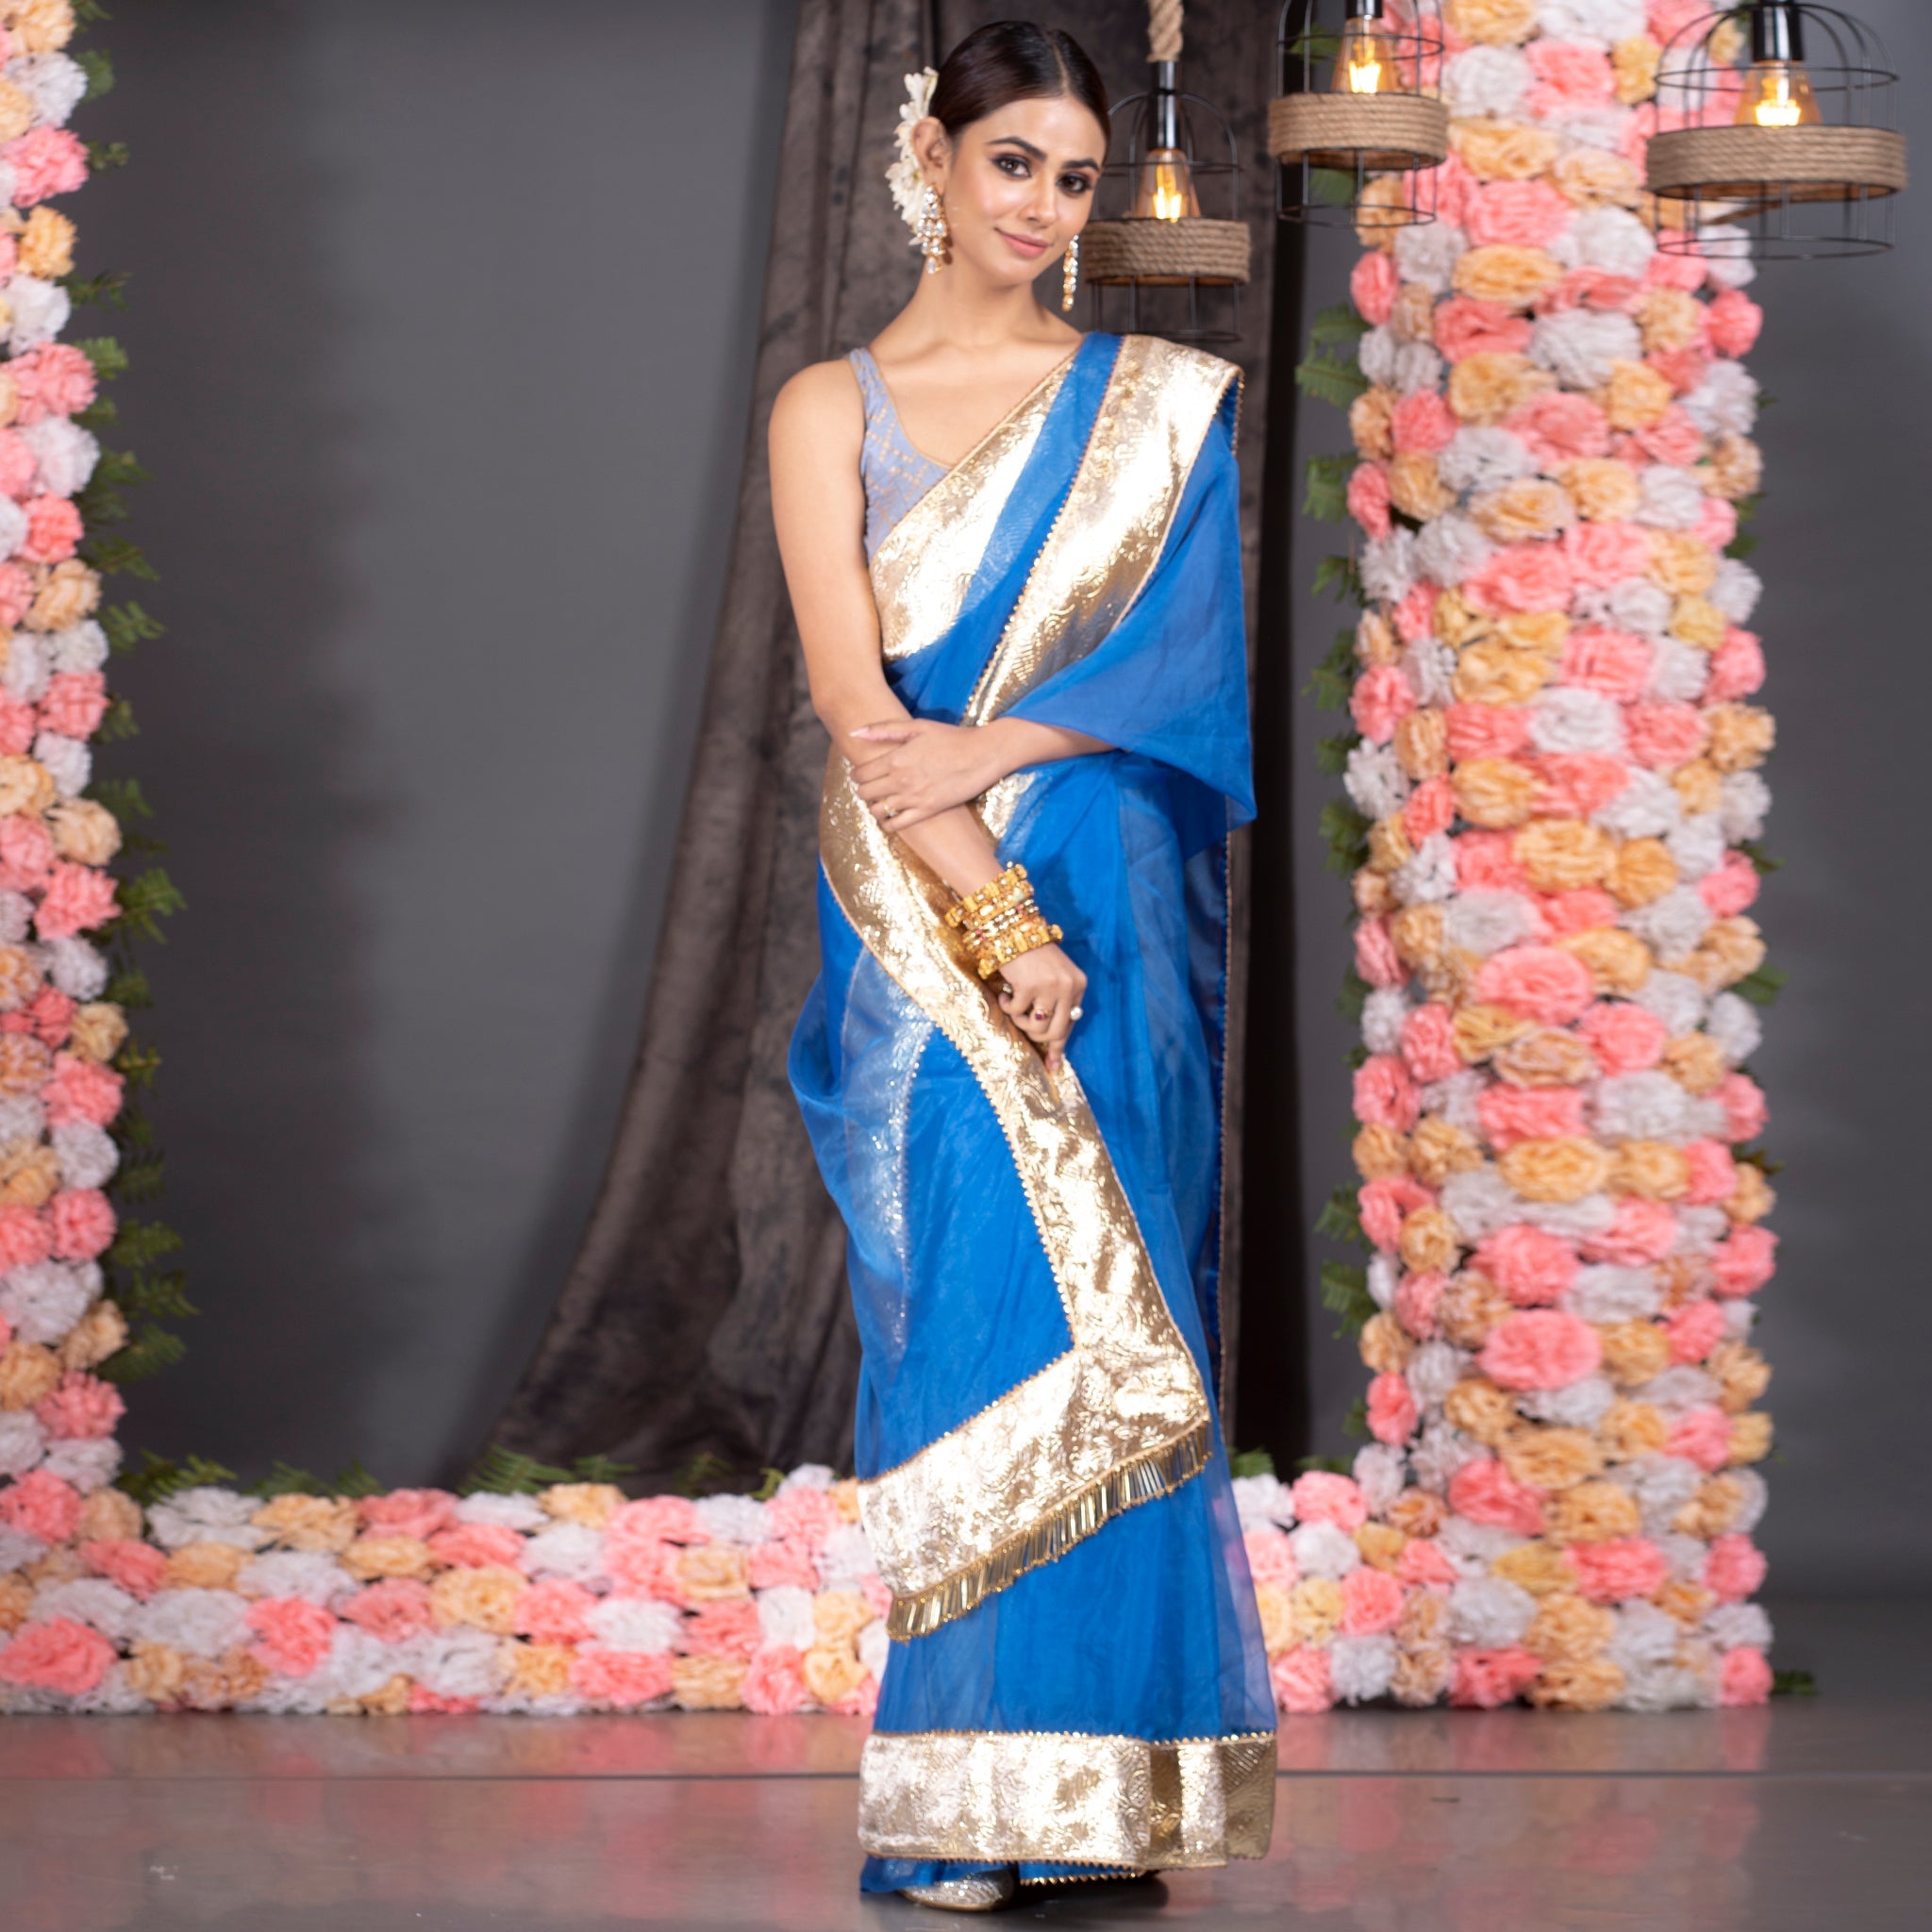 Women's Royal Blue Organza Saree With Gold Gota Border And Fringe Lace - Boveee